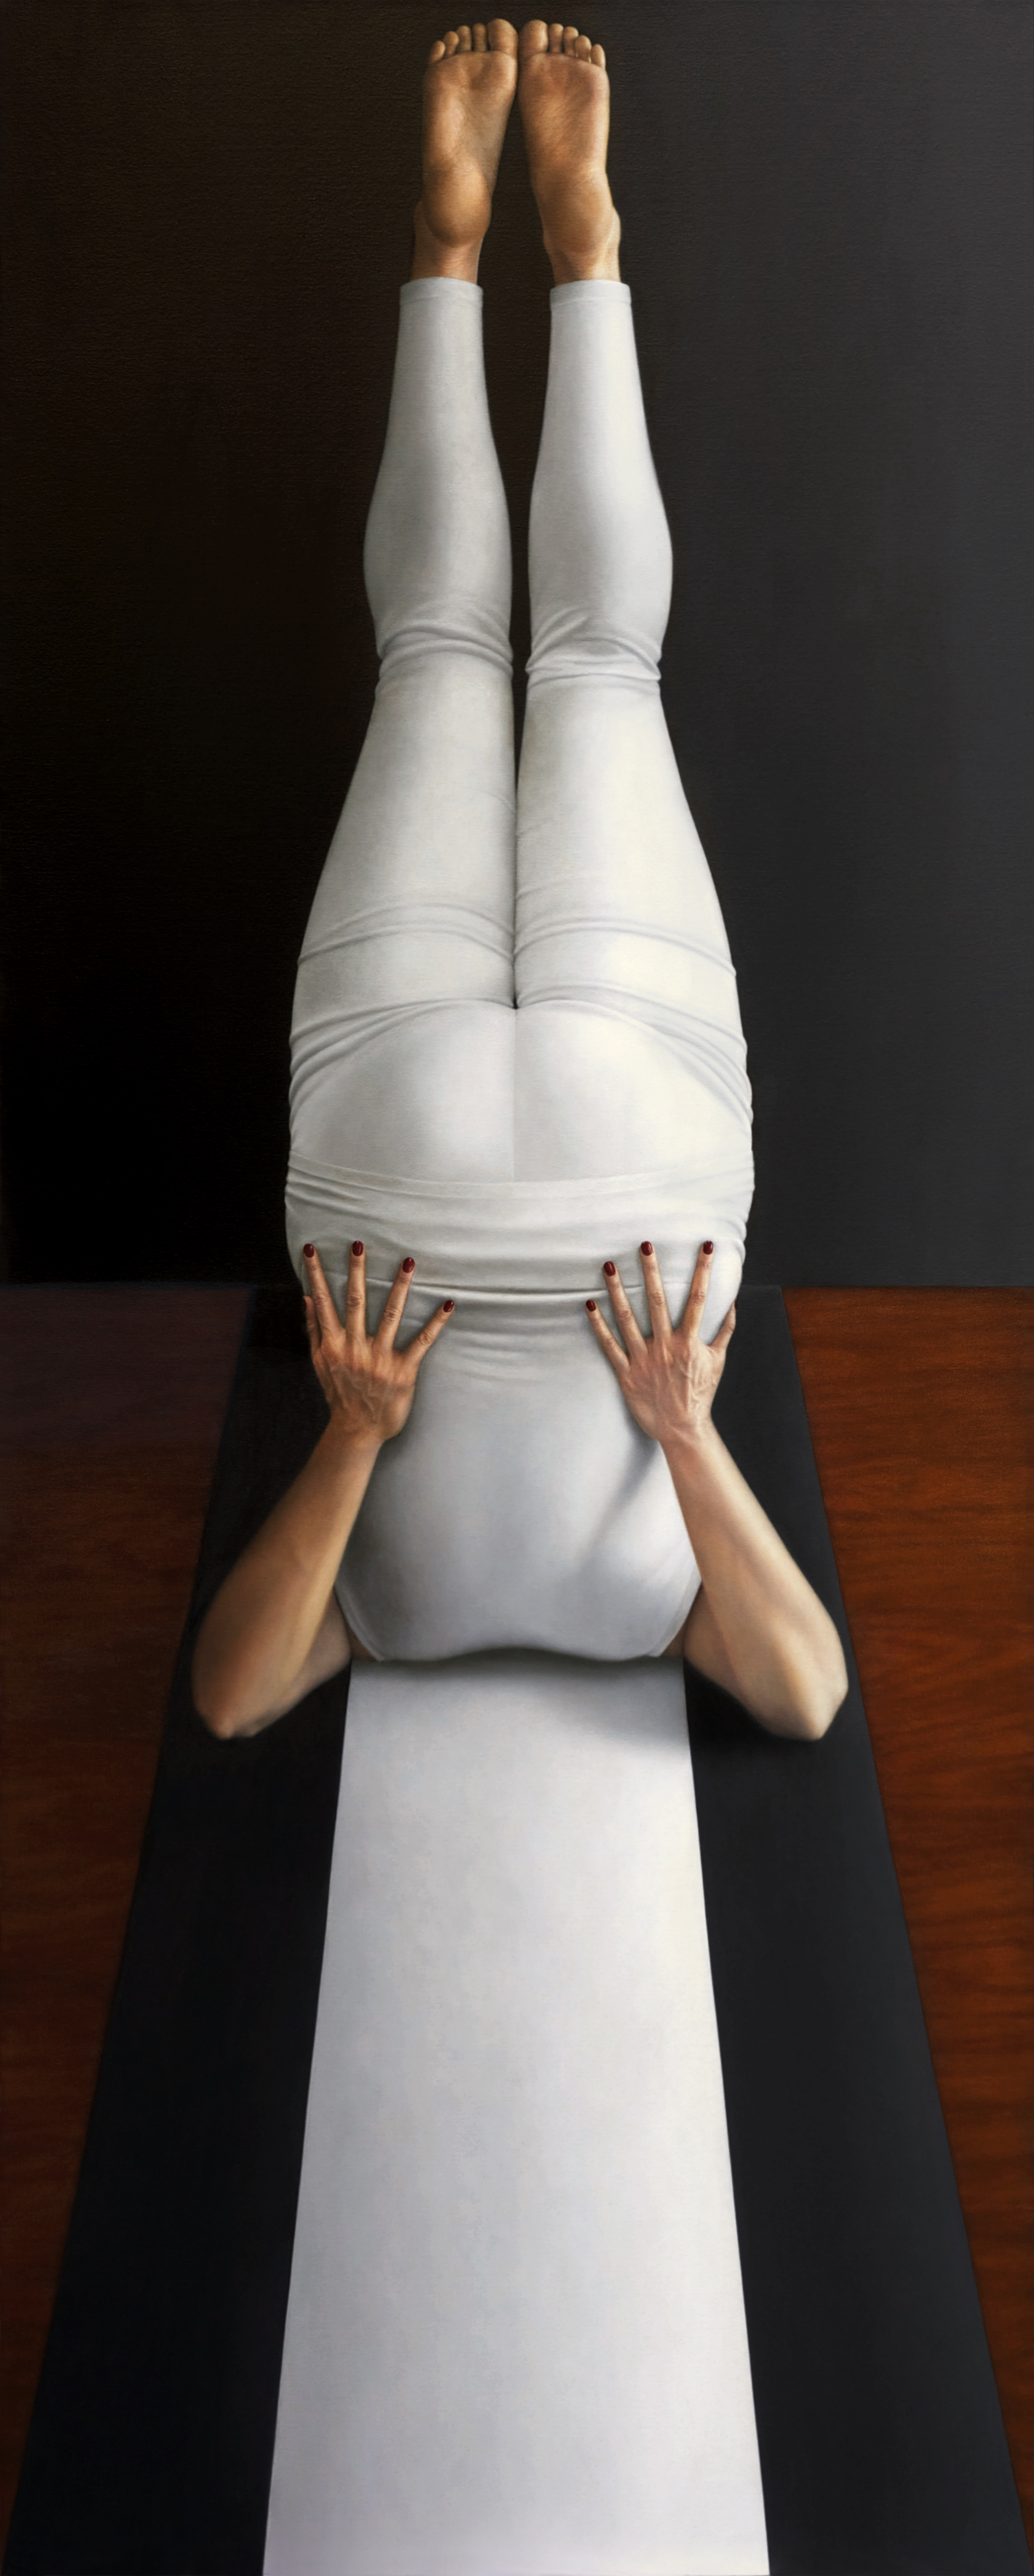   {feet above shoulders, hands on hips; triple stripes} , oil on canvas, 90” x 36” 